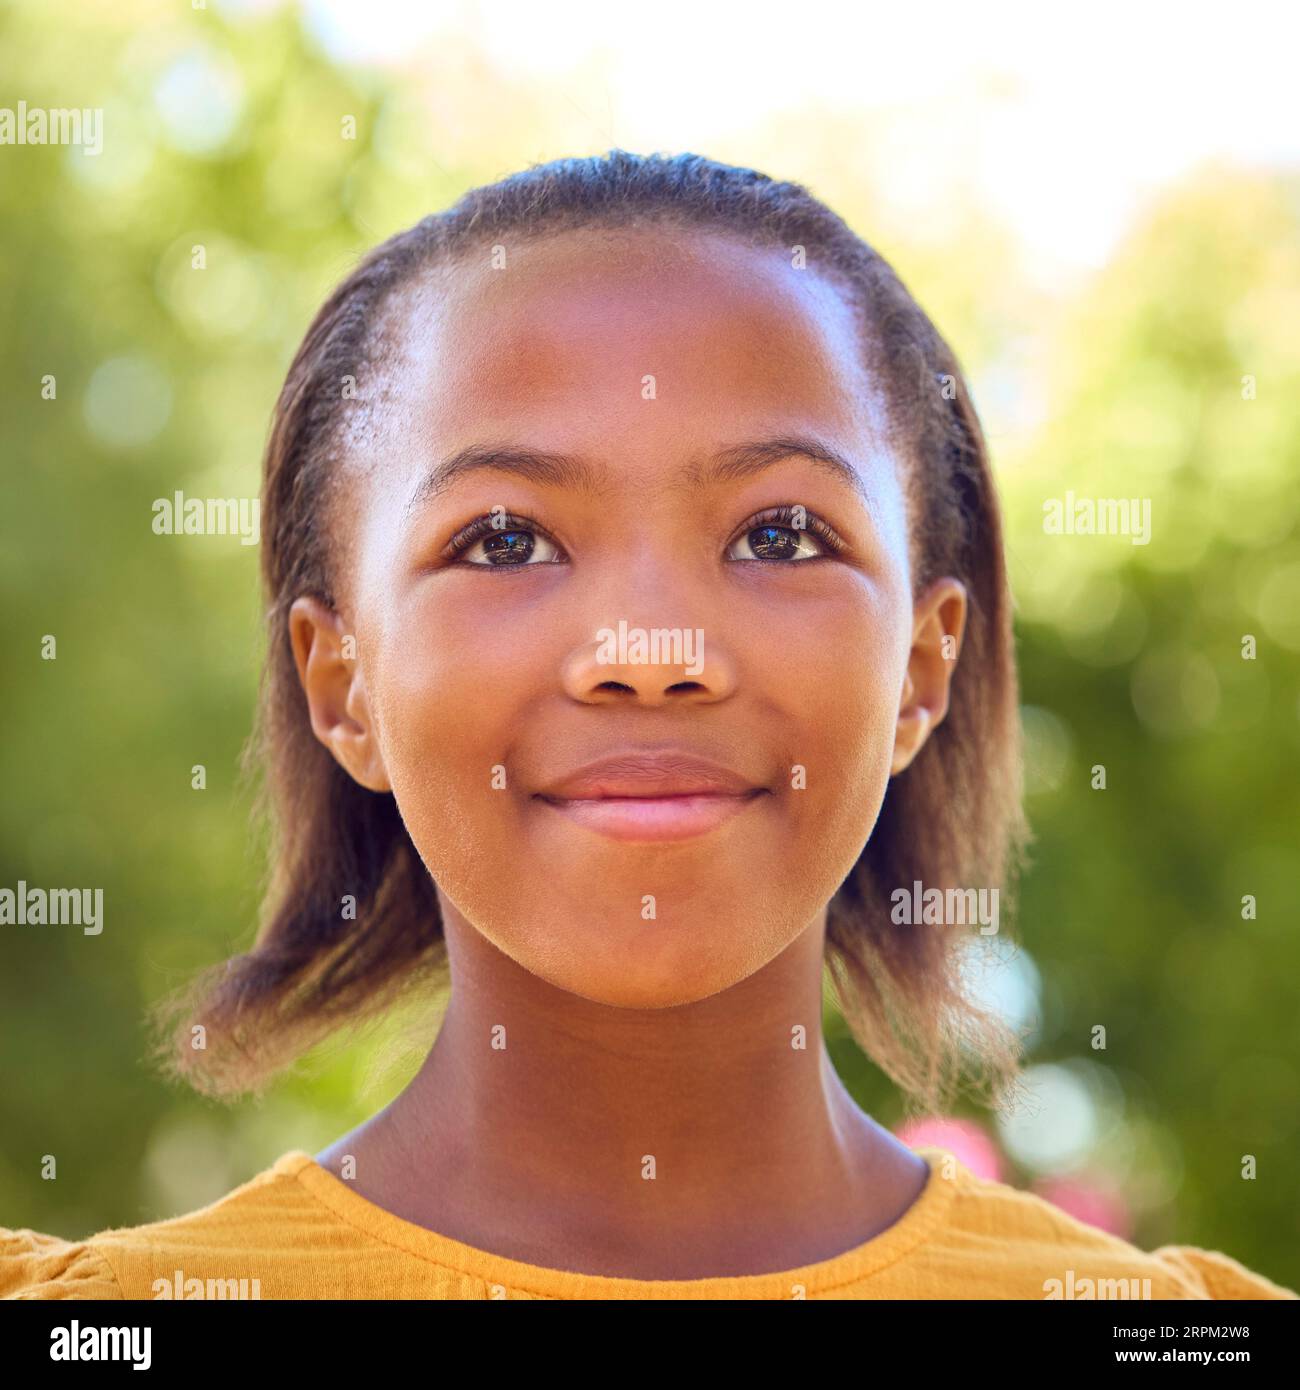 Portrait Of Smiling Young Girl Standing Outdoors In Summer Garden Park Or Countryside Stock Photo